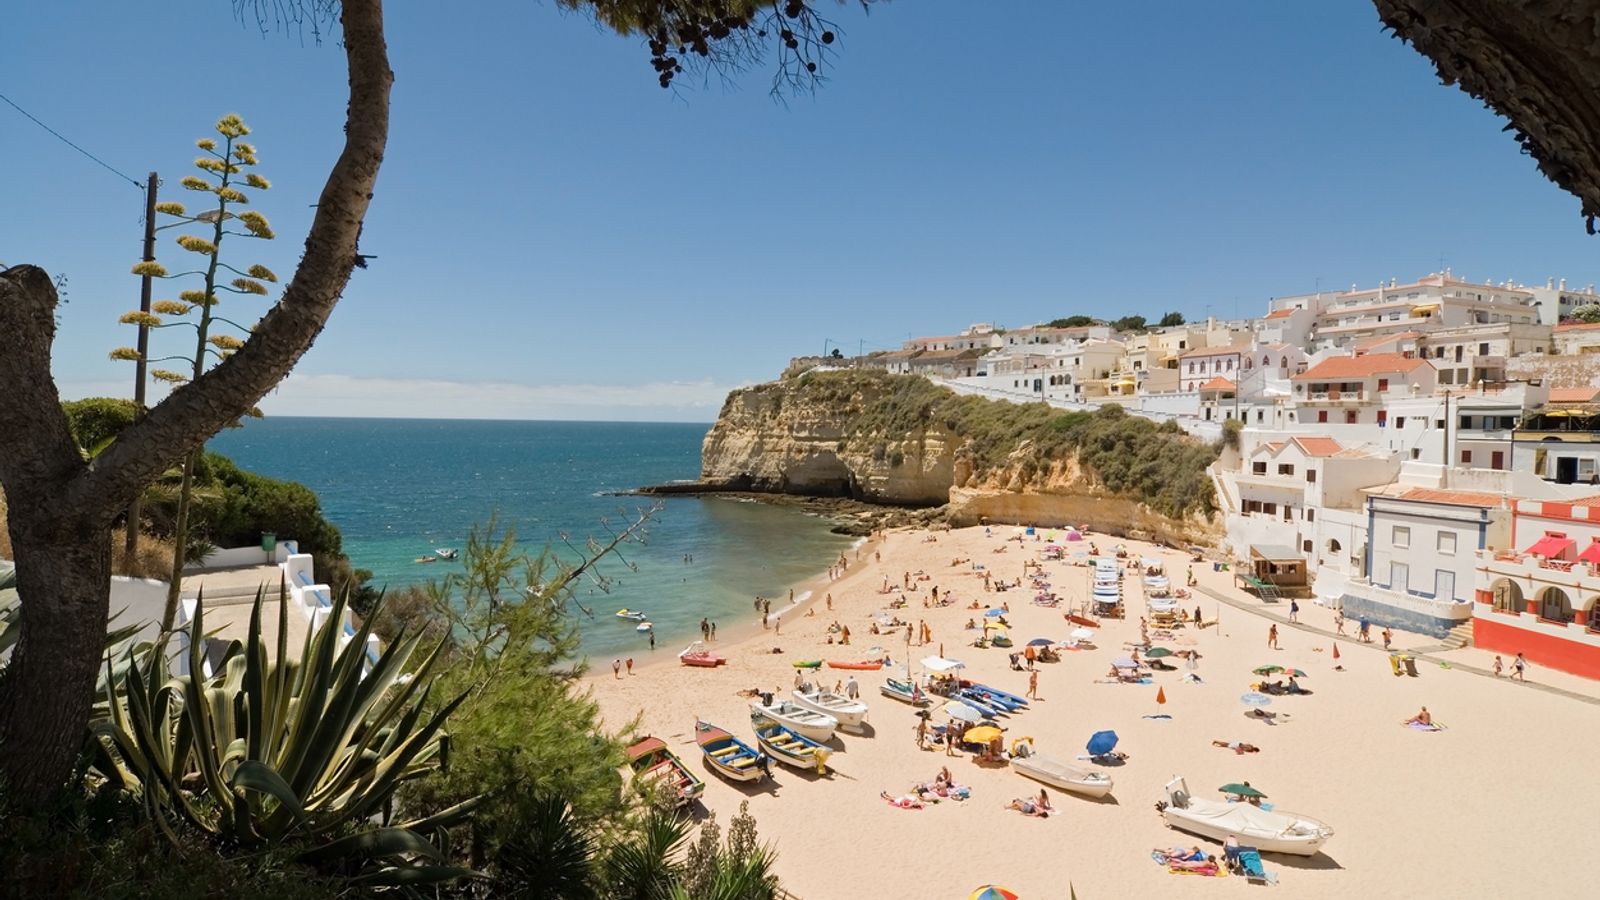 COVID-19: Portugal confirms UK tourists with negative coronavirus test allowed to travel from Monday